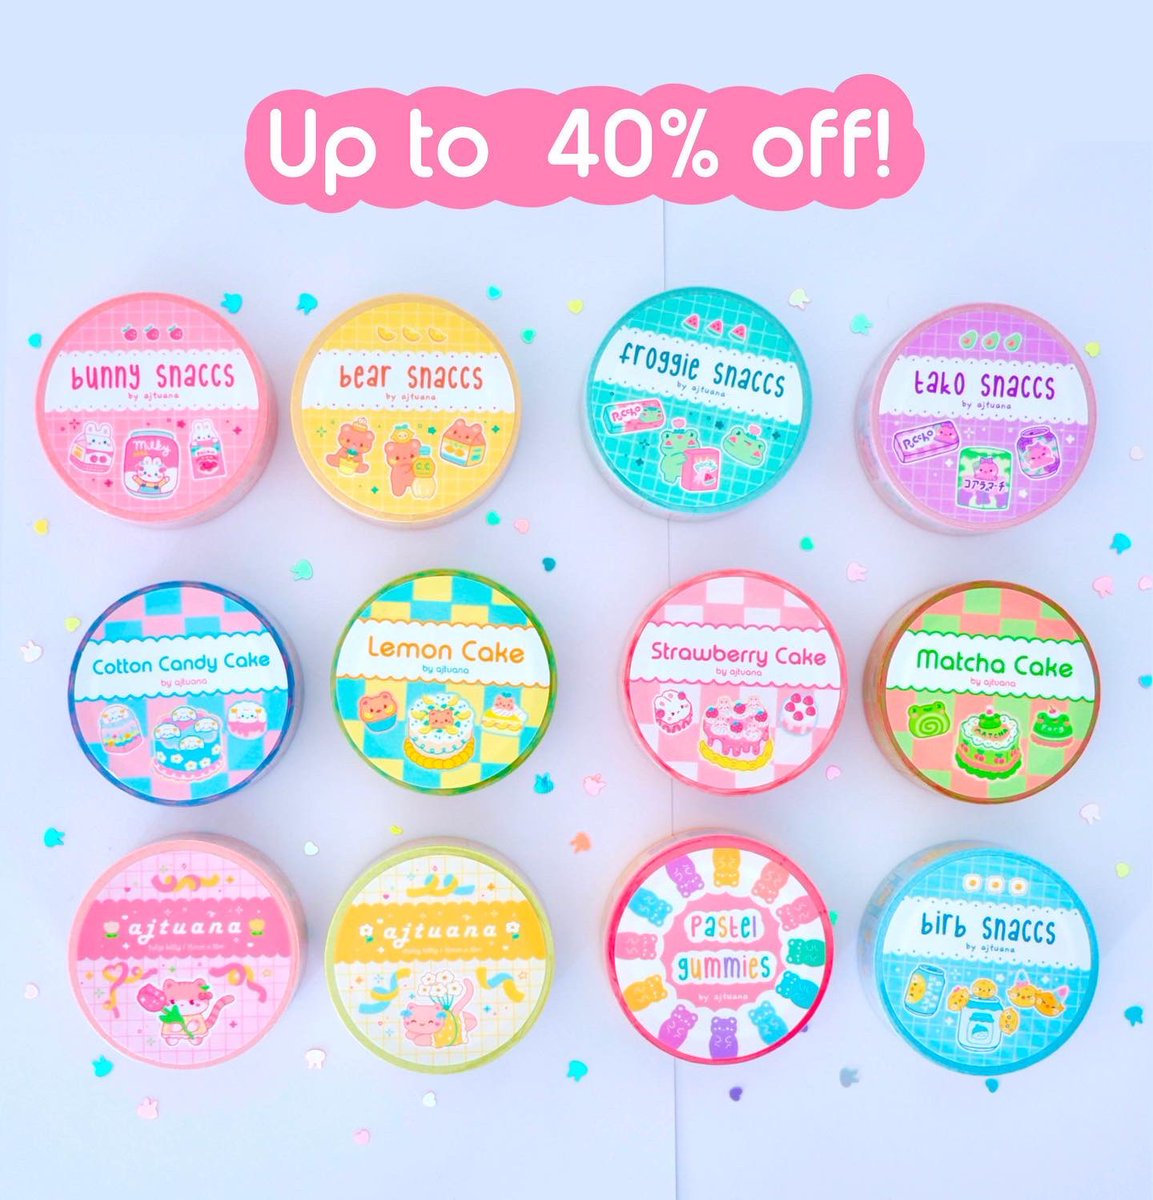 20% sale ongoing!  at https://t.co/pCVqVaC7R8 🎉

#kawaii #Sticker #artistsontwitter 